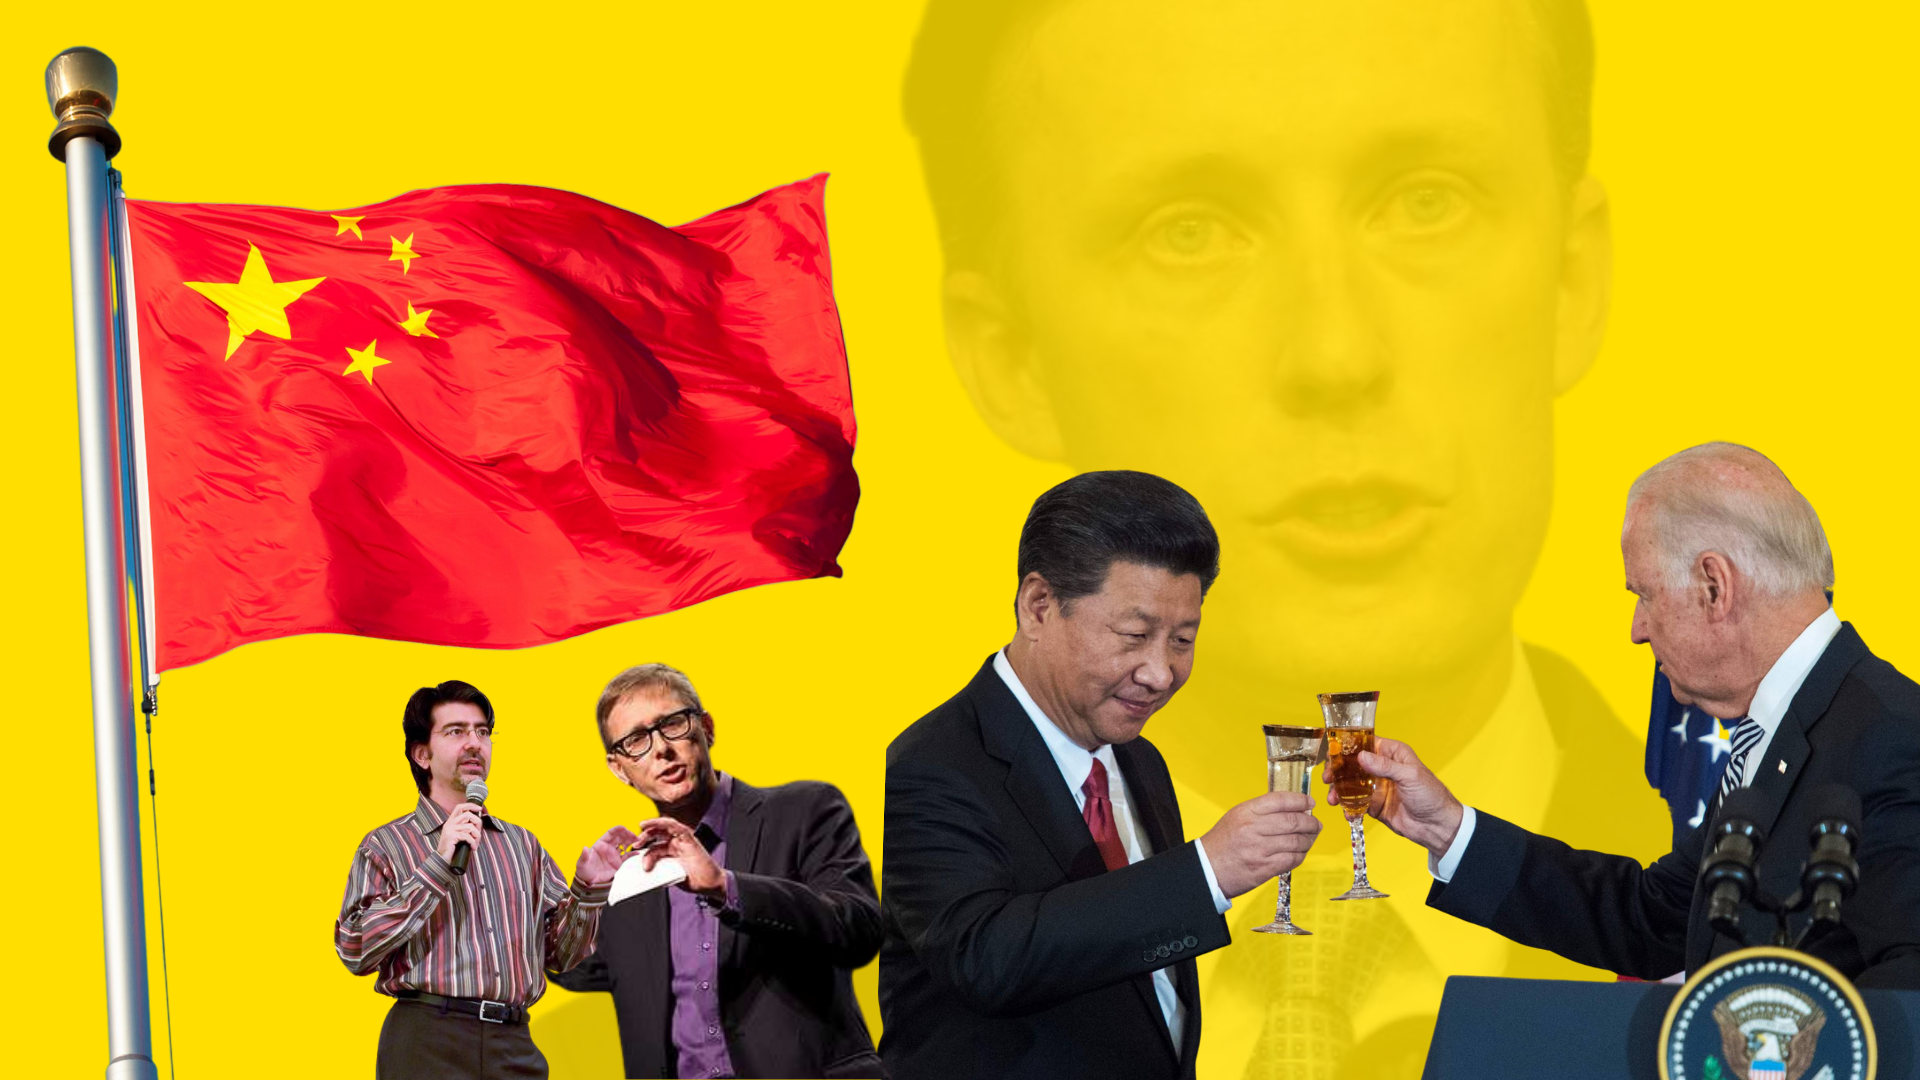 REVEALED: China's State Propaganda Group Boasts Control Over Western Think Tanks, 'Election Integrity' Groups, And Even Joe Biden's National Security Team.